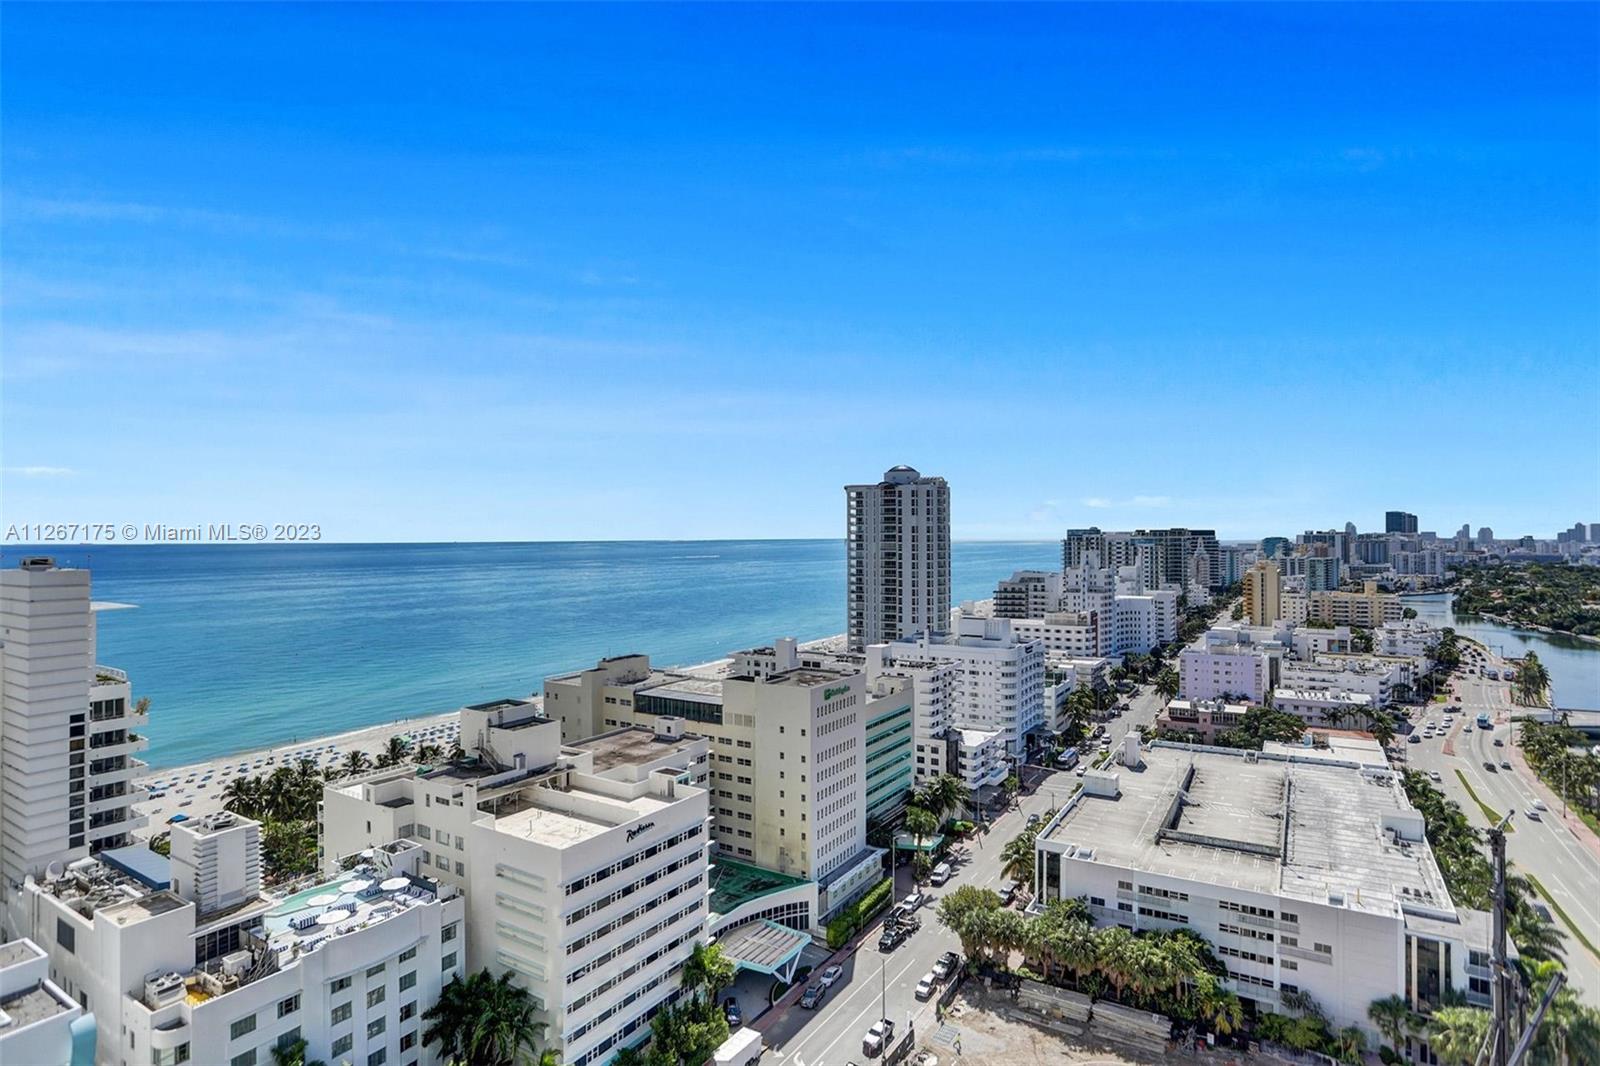 Enjoy gorgeous ocean and city views from this corner 2BD/3BA on the 21st floor at Fontainebleau II. This beautiful double unit shares a private entrance foyer, has 3 balconies and is furnished turnkey with 2 king beds, 2 sleeper sofas, a full kitchen and washer/dryer. Enjoy full service, vacation-style living! Enroll in hotel rental program & receive income while away! The Fontainebleau Resort offers luxury amenities on 22 oceanfront acres including award-winning restaurants, LIV night club, Lapis spa & state-of-the-art fitness center. Maintenance includes: AC, local calls, electricity, valet + daily free breakfast in the owner’s lounge.
 Click the virtual tour link to see video of property & contact me directly for more info.